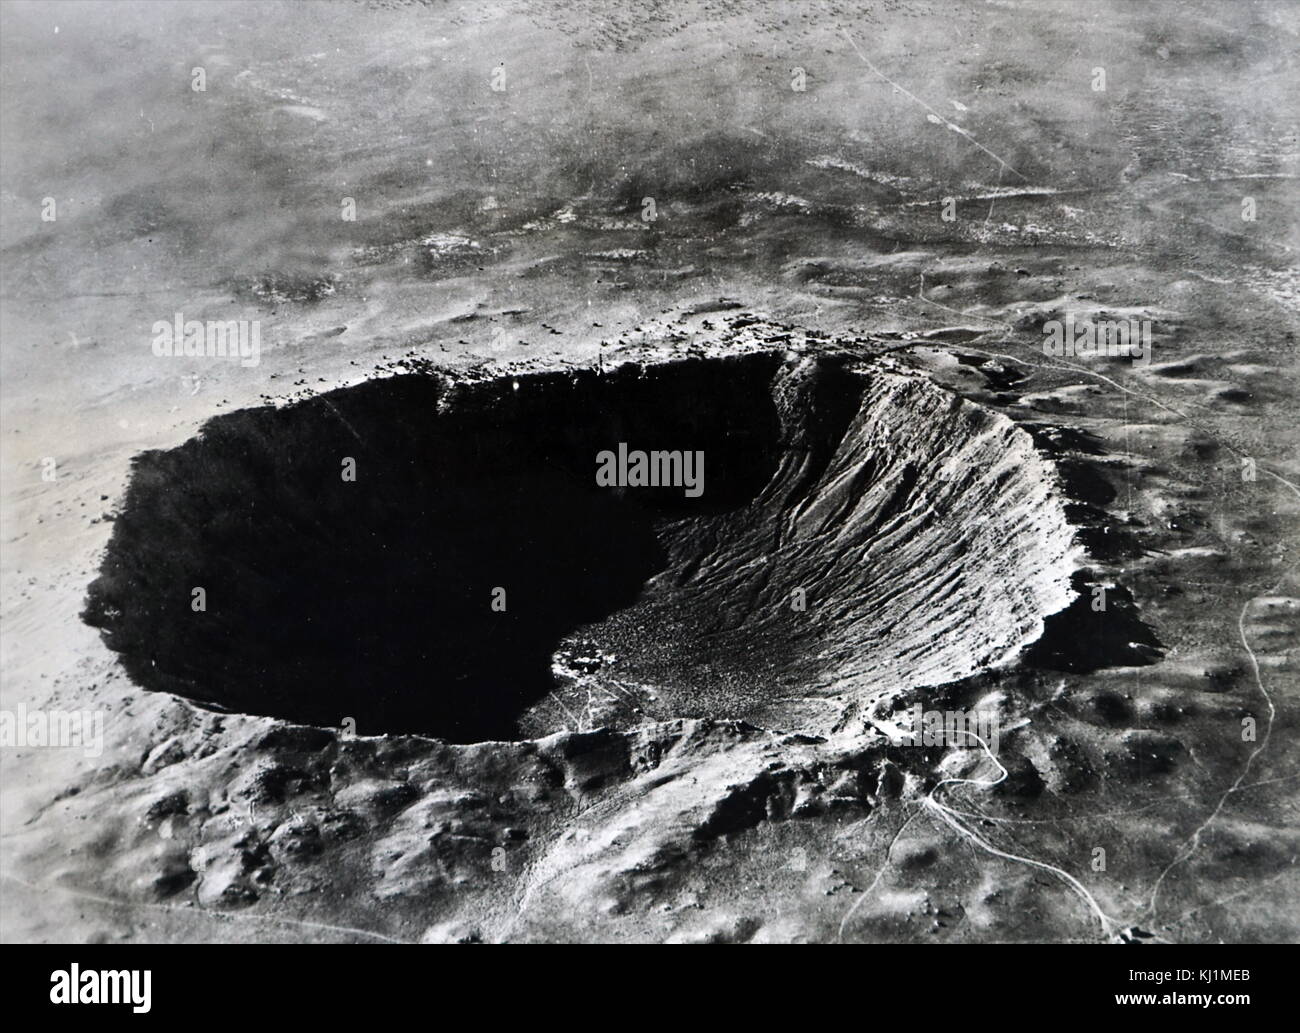 Photograph of the Arizona meteor crater. Meteor Crater is a meteorite impact crater approximately 37 miles (60 km) east of Flagstaff and 18 miles (29 km) west of Winslow in the northern Arizona desert of the United States. Dated 20th Century Stock Photo